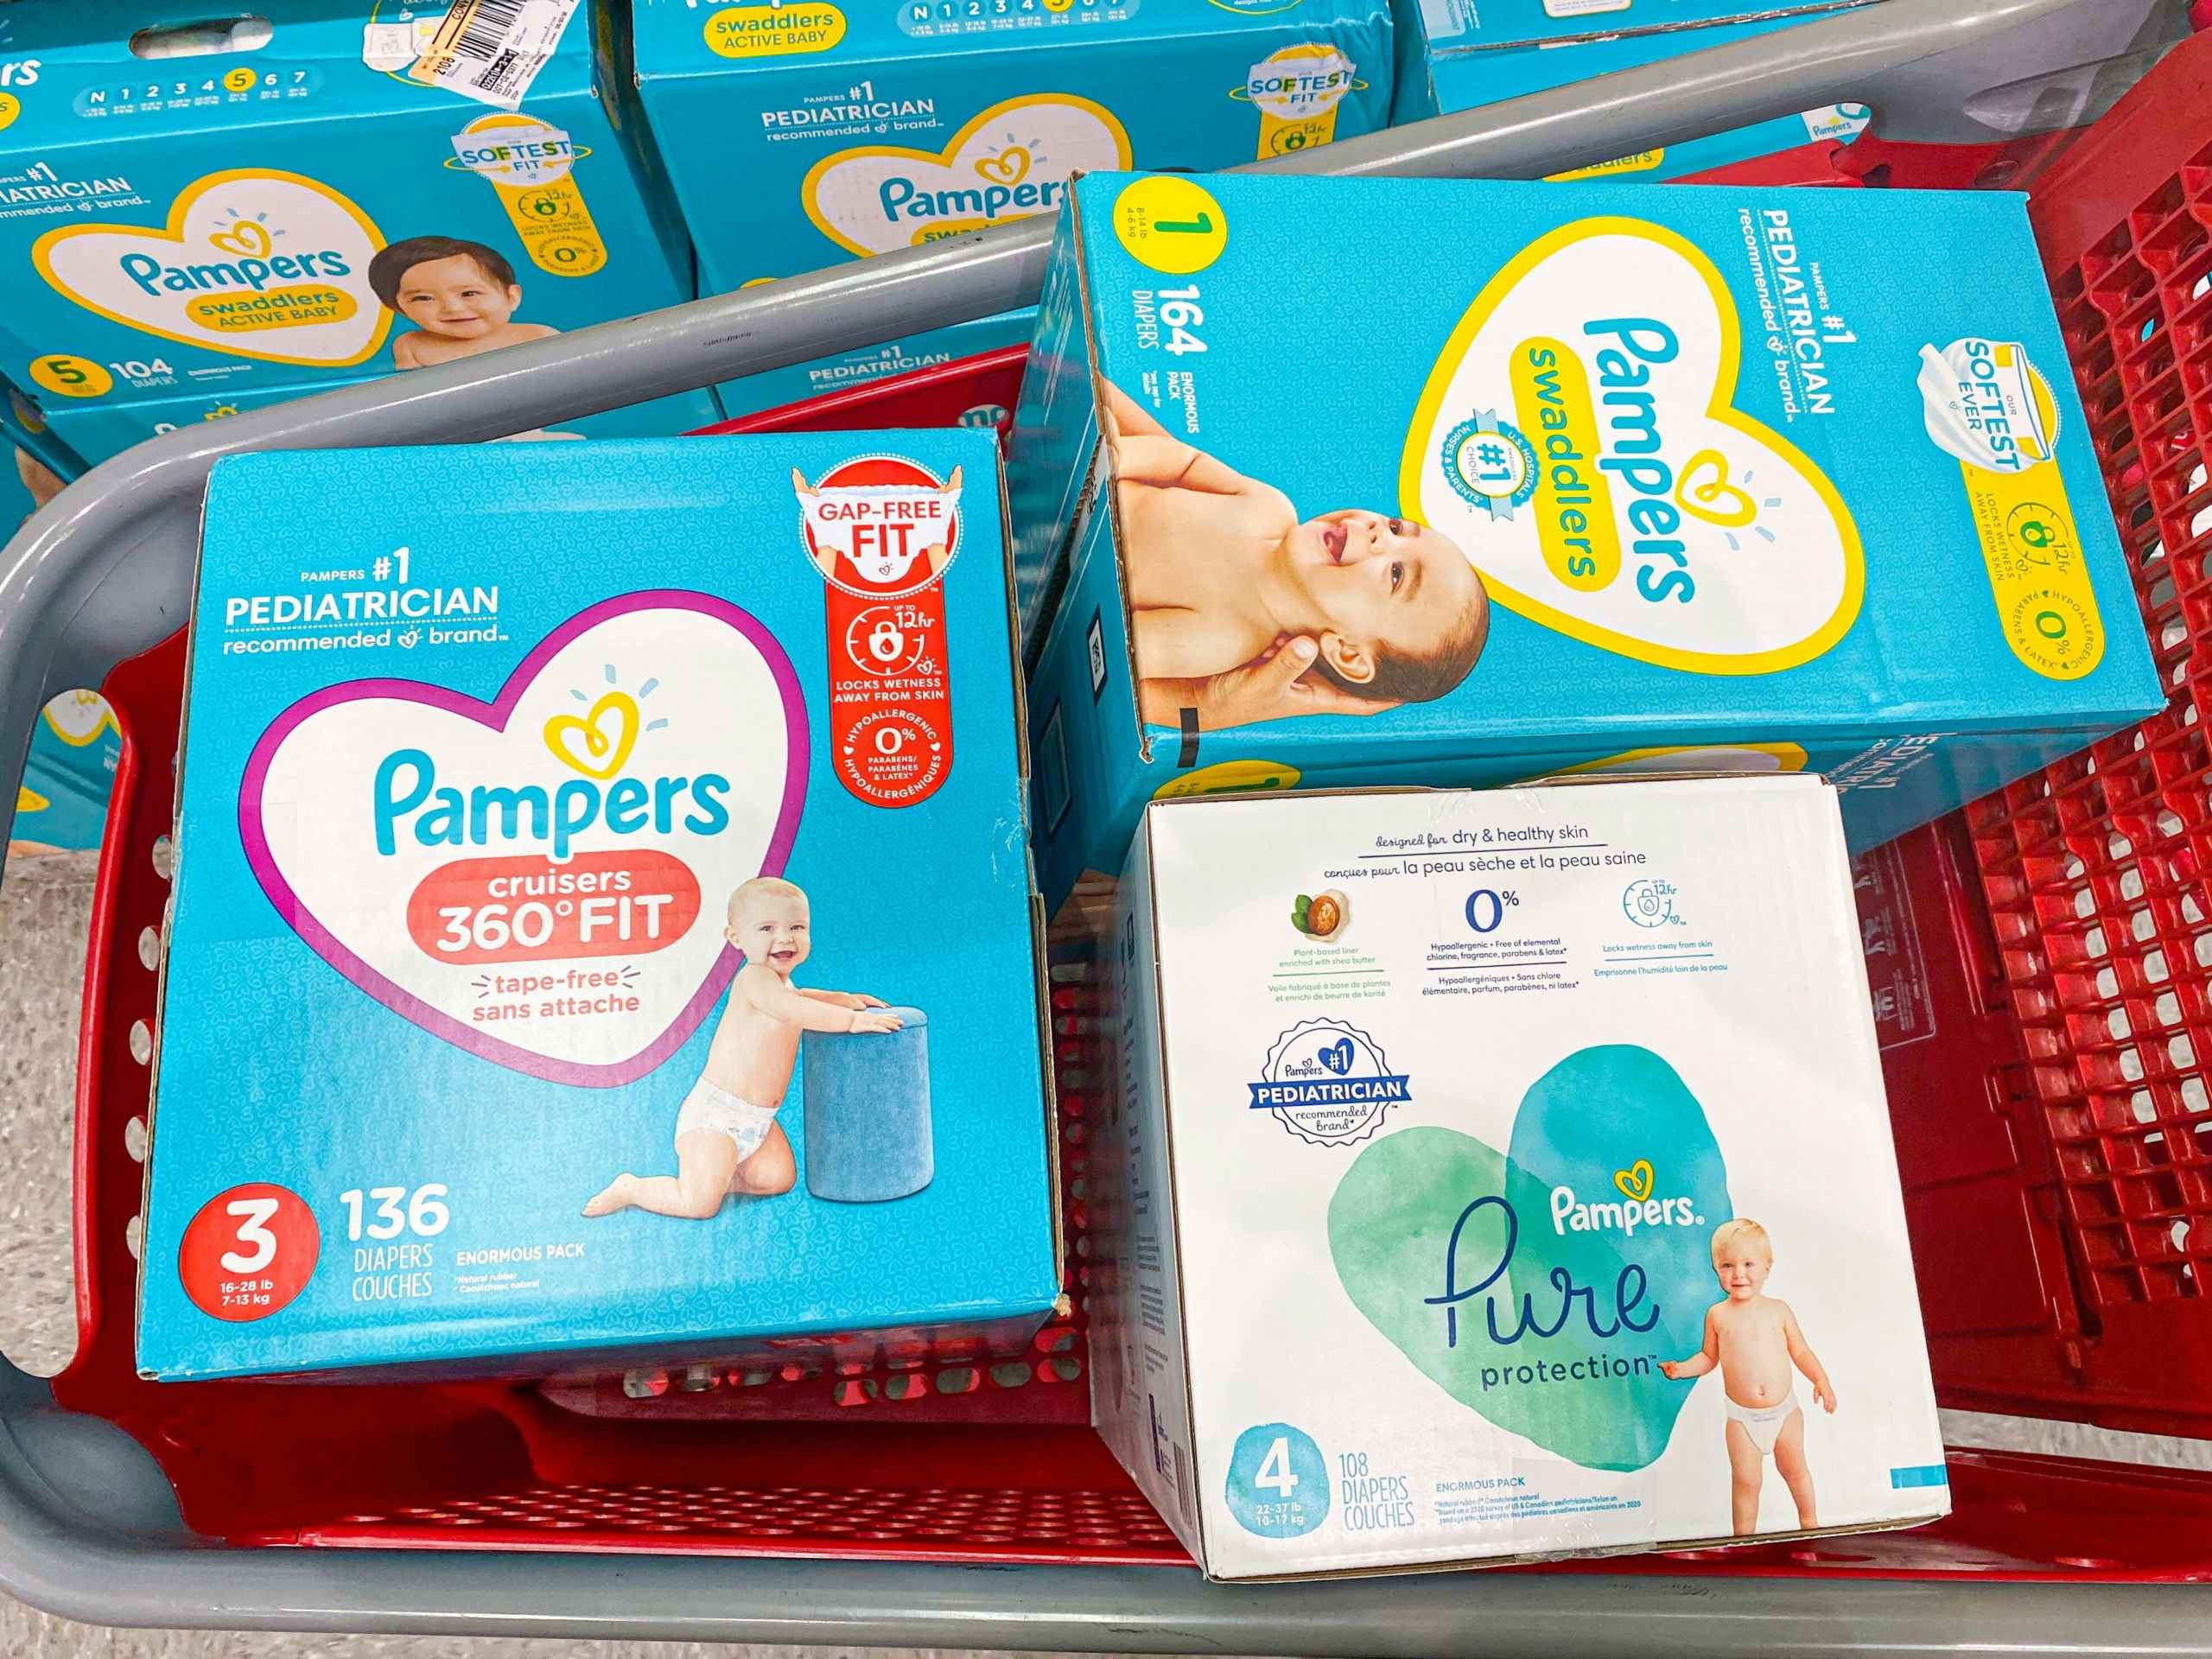 Three boxes of Pampers diapers stacked in a Target shopping cart